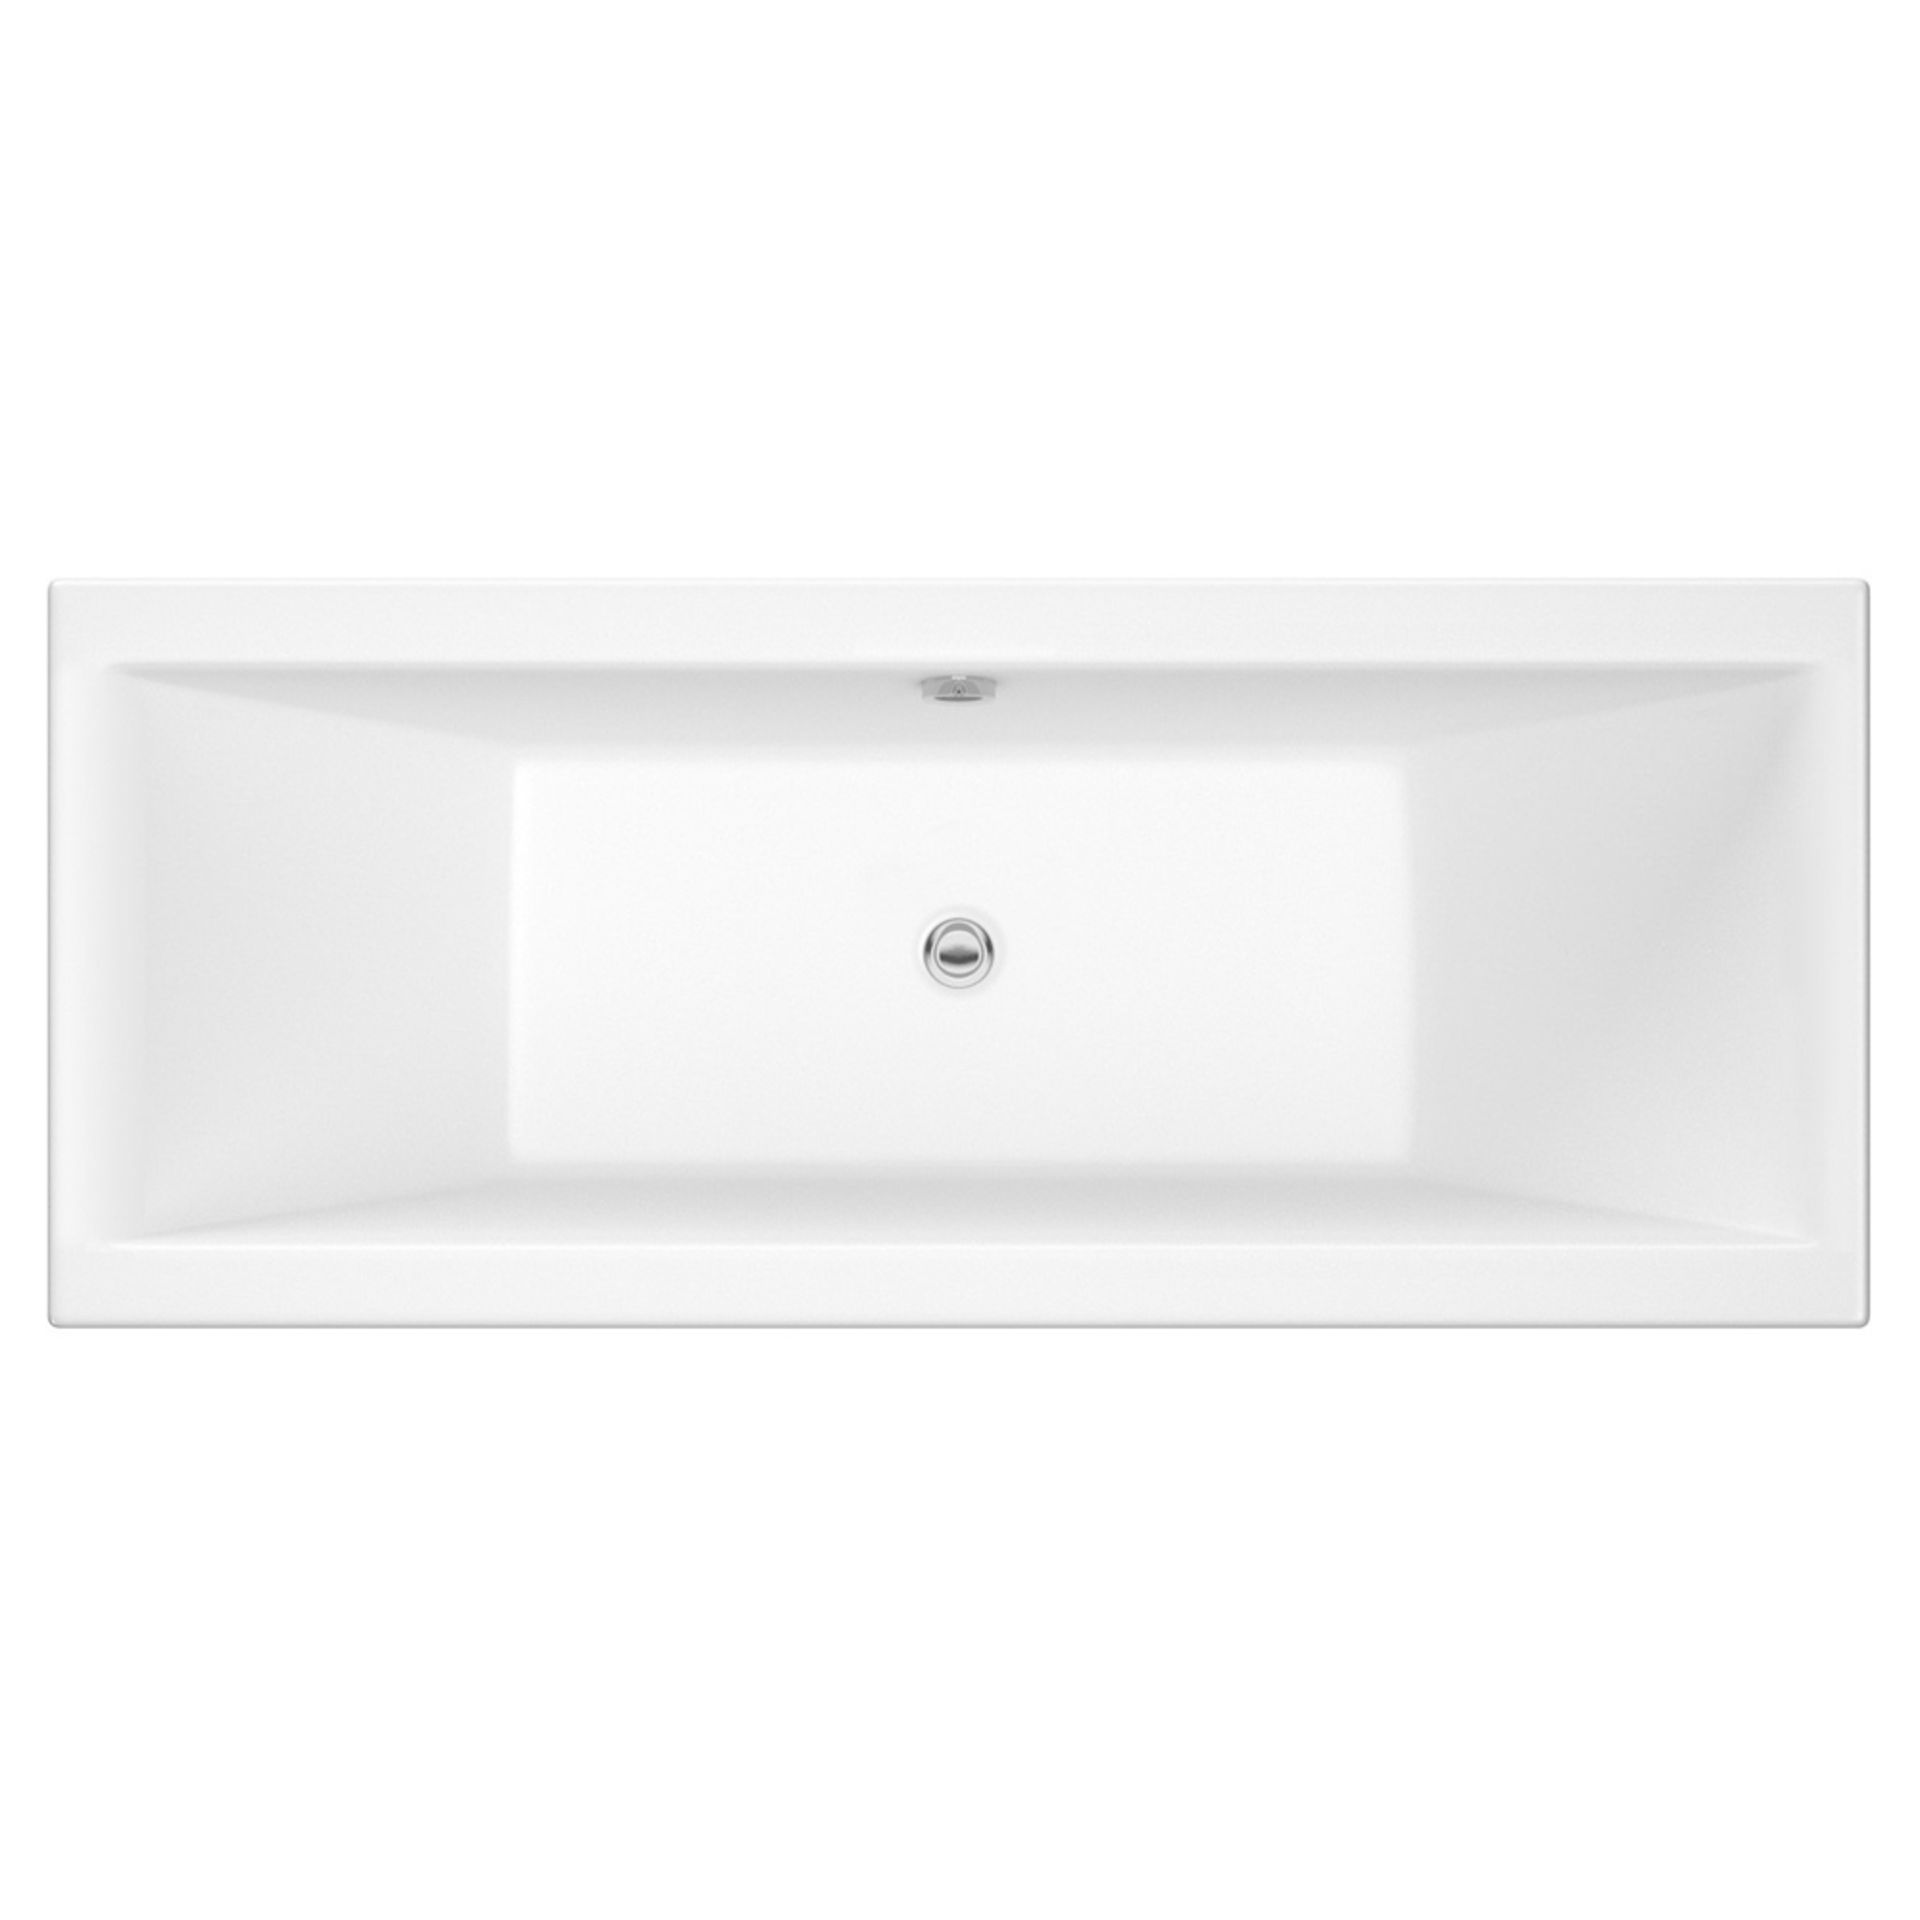 (RC7) 2000x900mm Keramag Deep Double Ended Bath. RRP £627.99. Our range of double ended baths... - Image 2 of 5